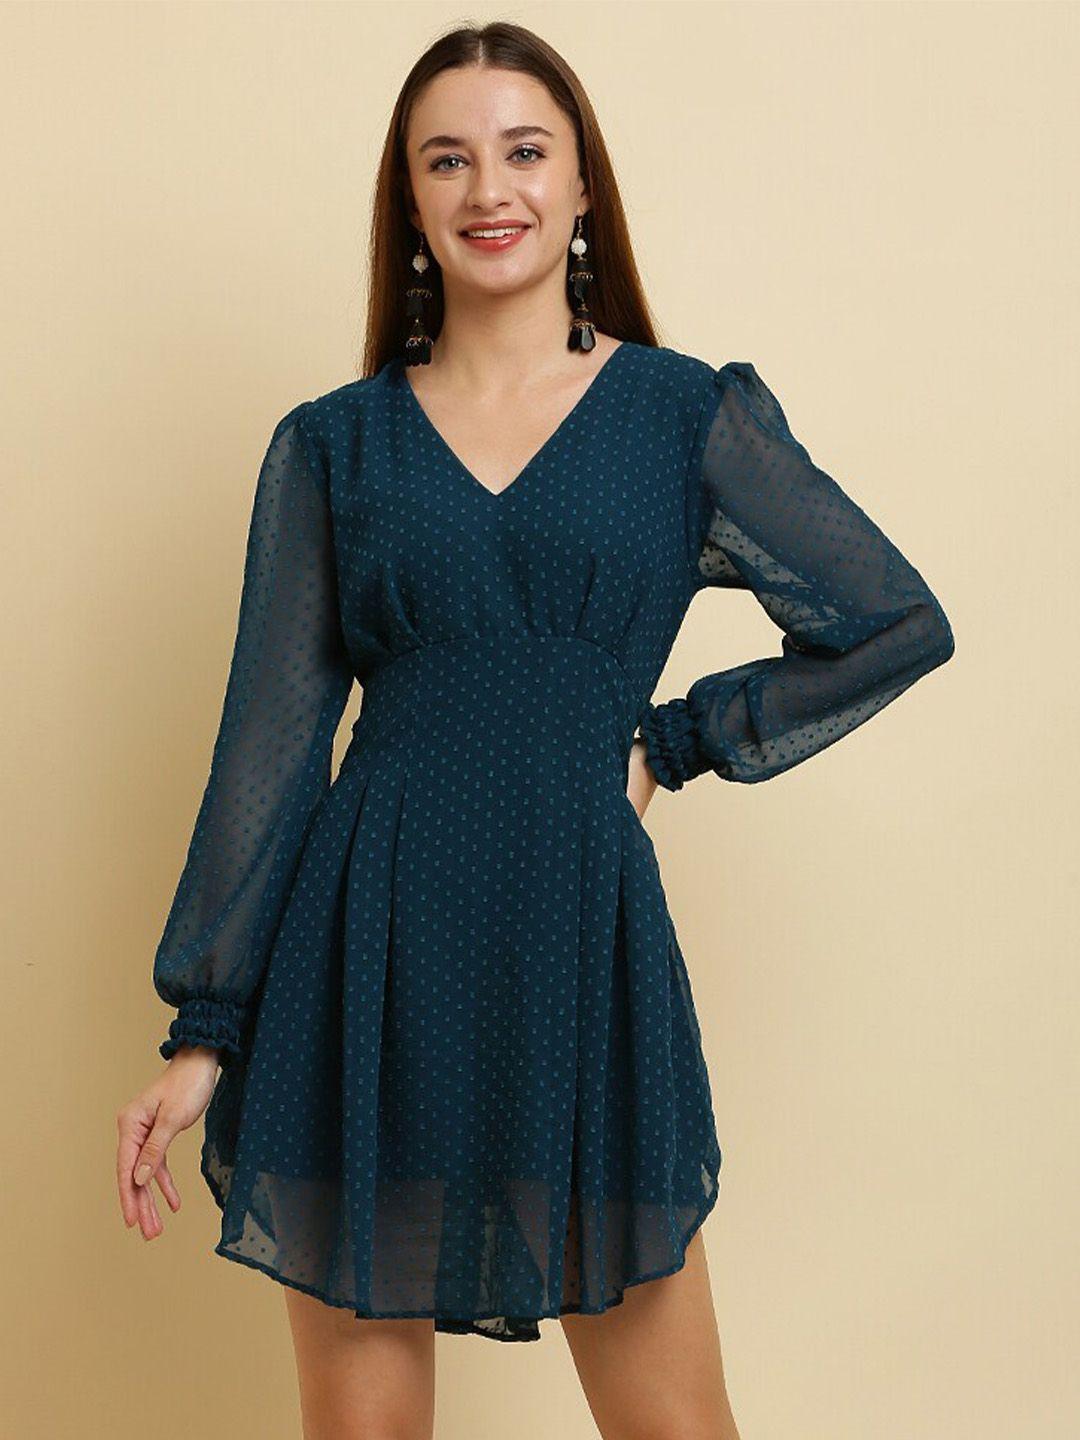 here&now teal polka dot puff sleeve chiffon fit & flare dress